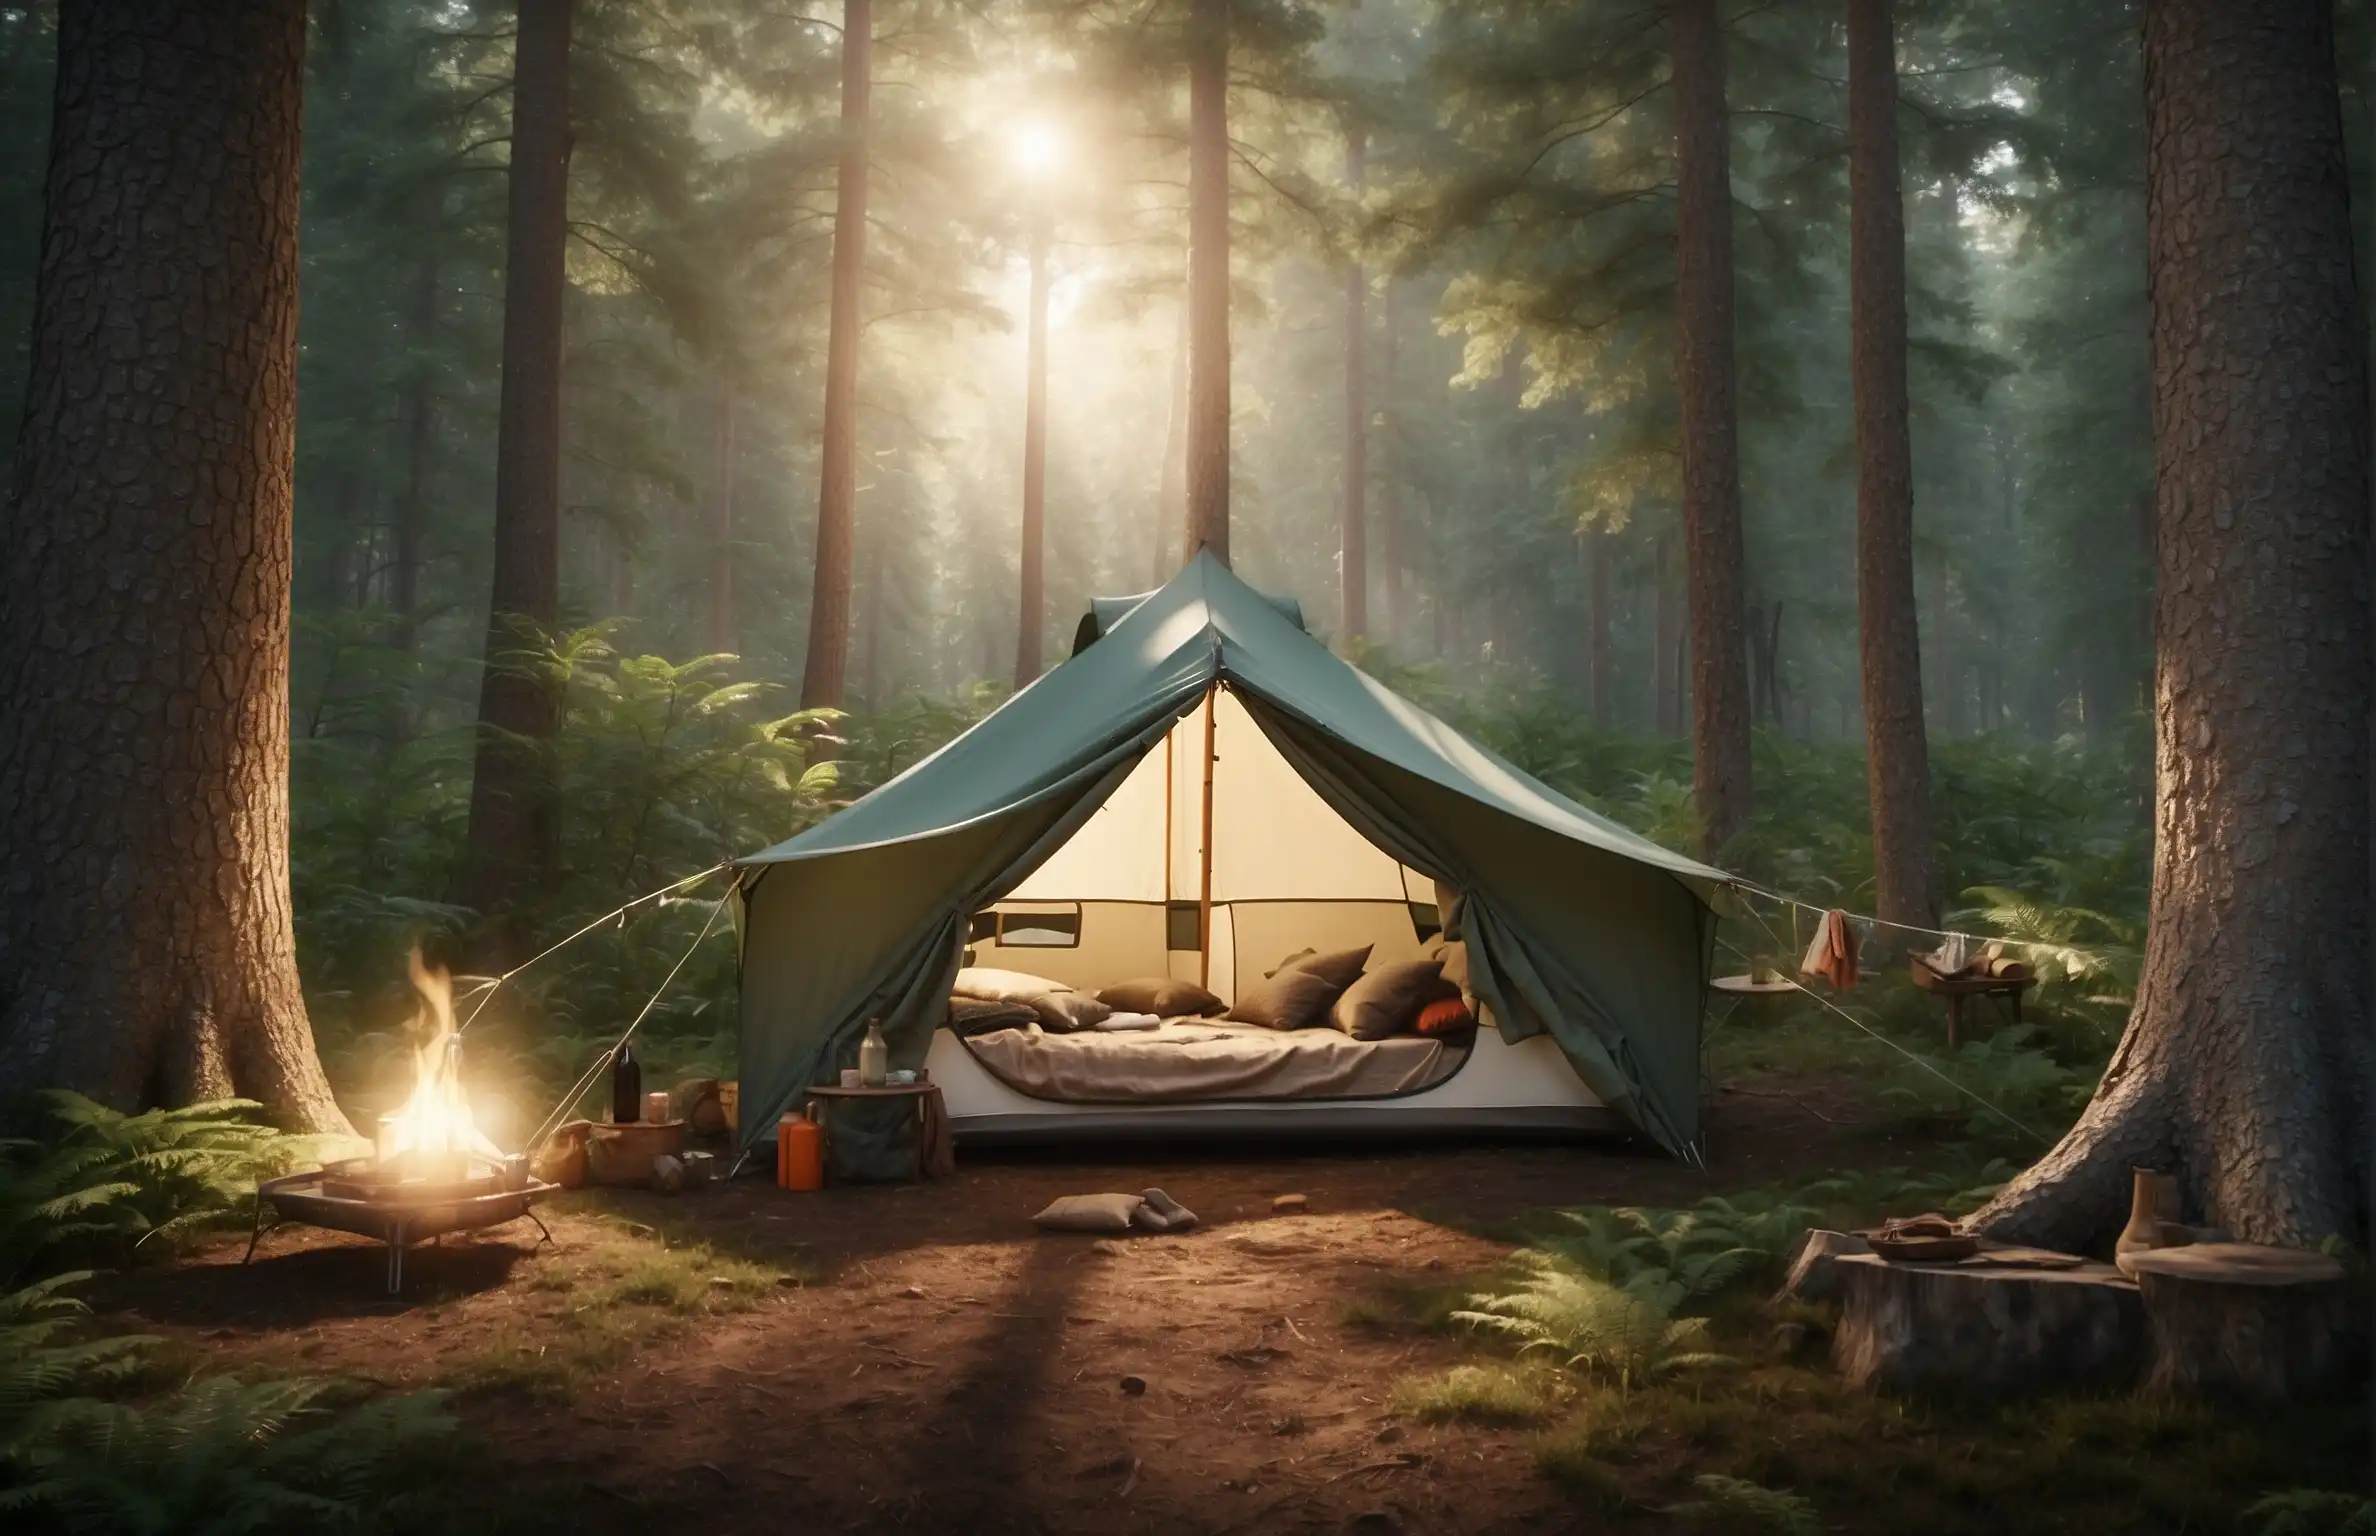 How to Stay Cool While Camping Without Electricity